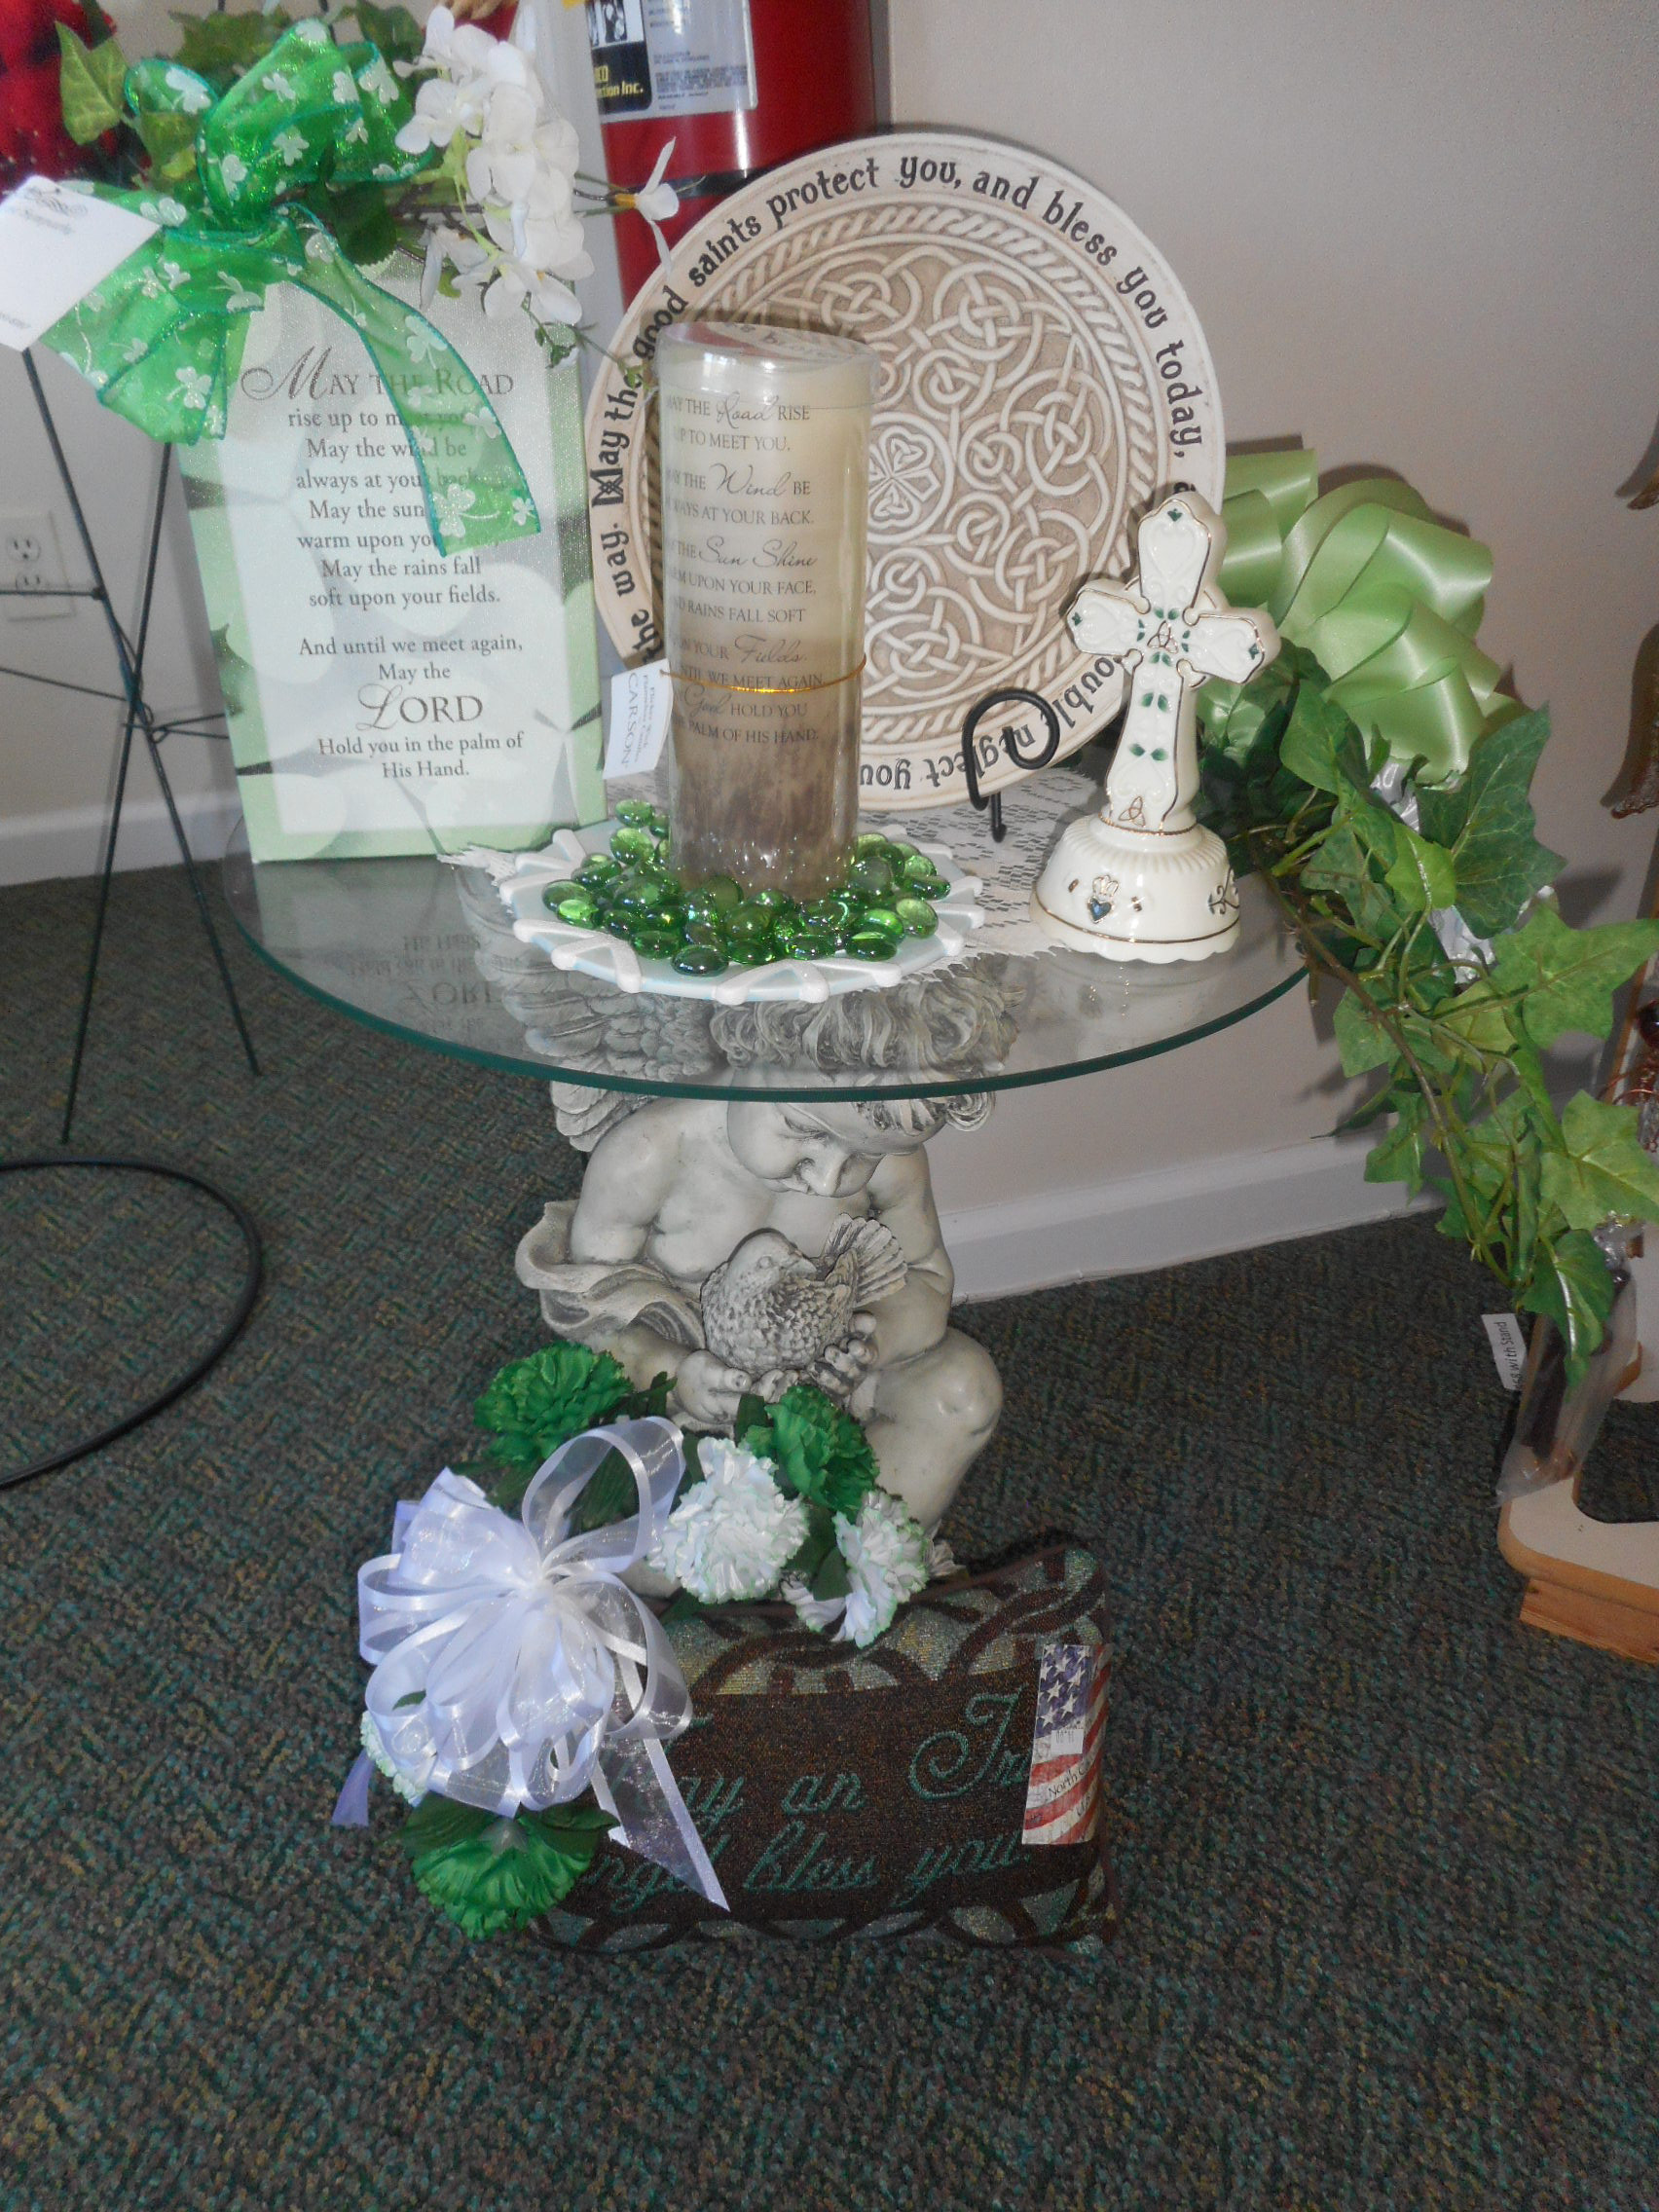 14 Ideal Heritage Irish Crystal Vase 2024 free download heritage irish crystal vase of floral arrangements wreaths plant gardens dish gardens pertaining to candles plaques music box cross and stepping stone all for the irish heritage we can incor